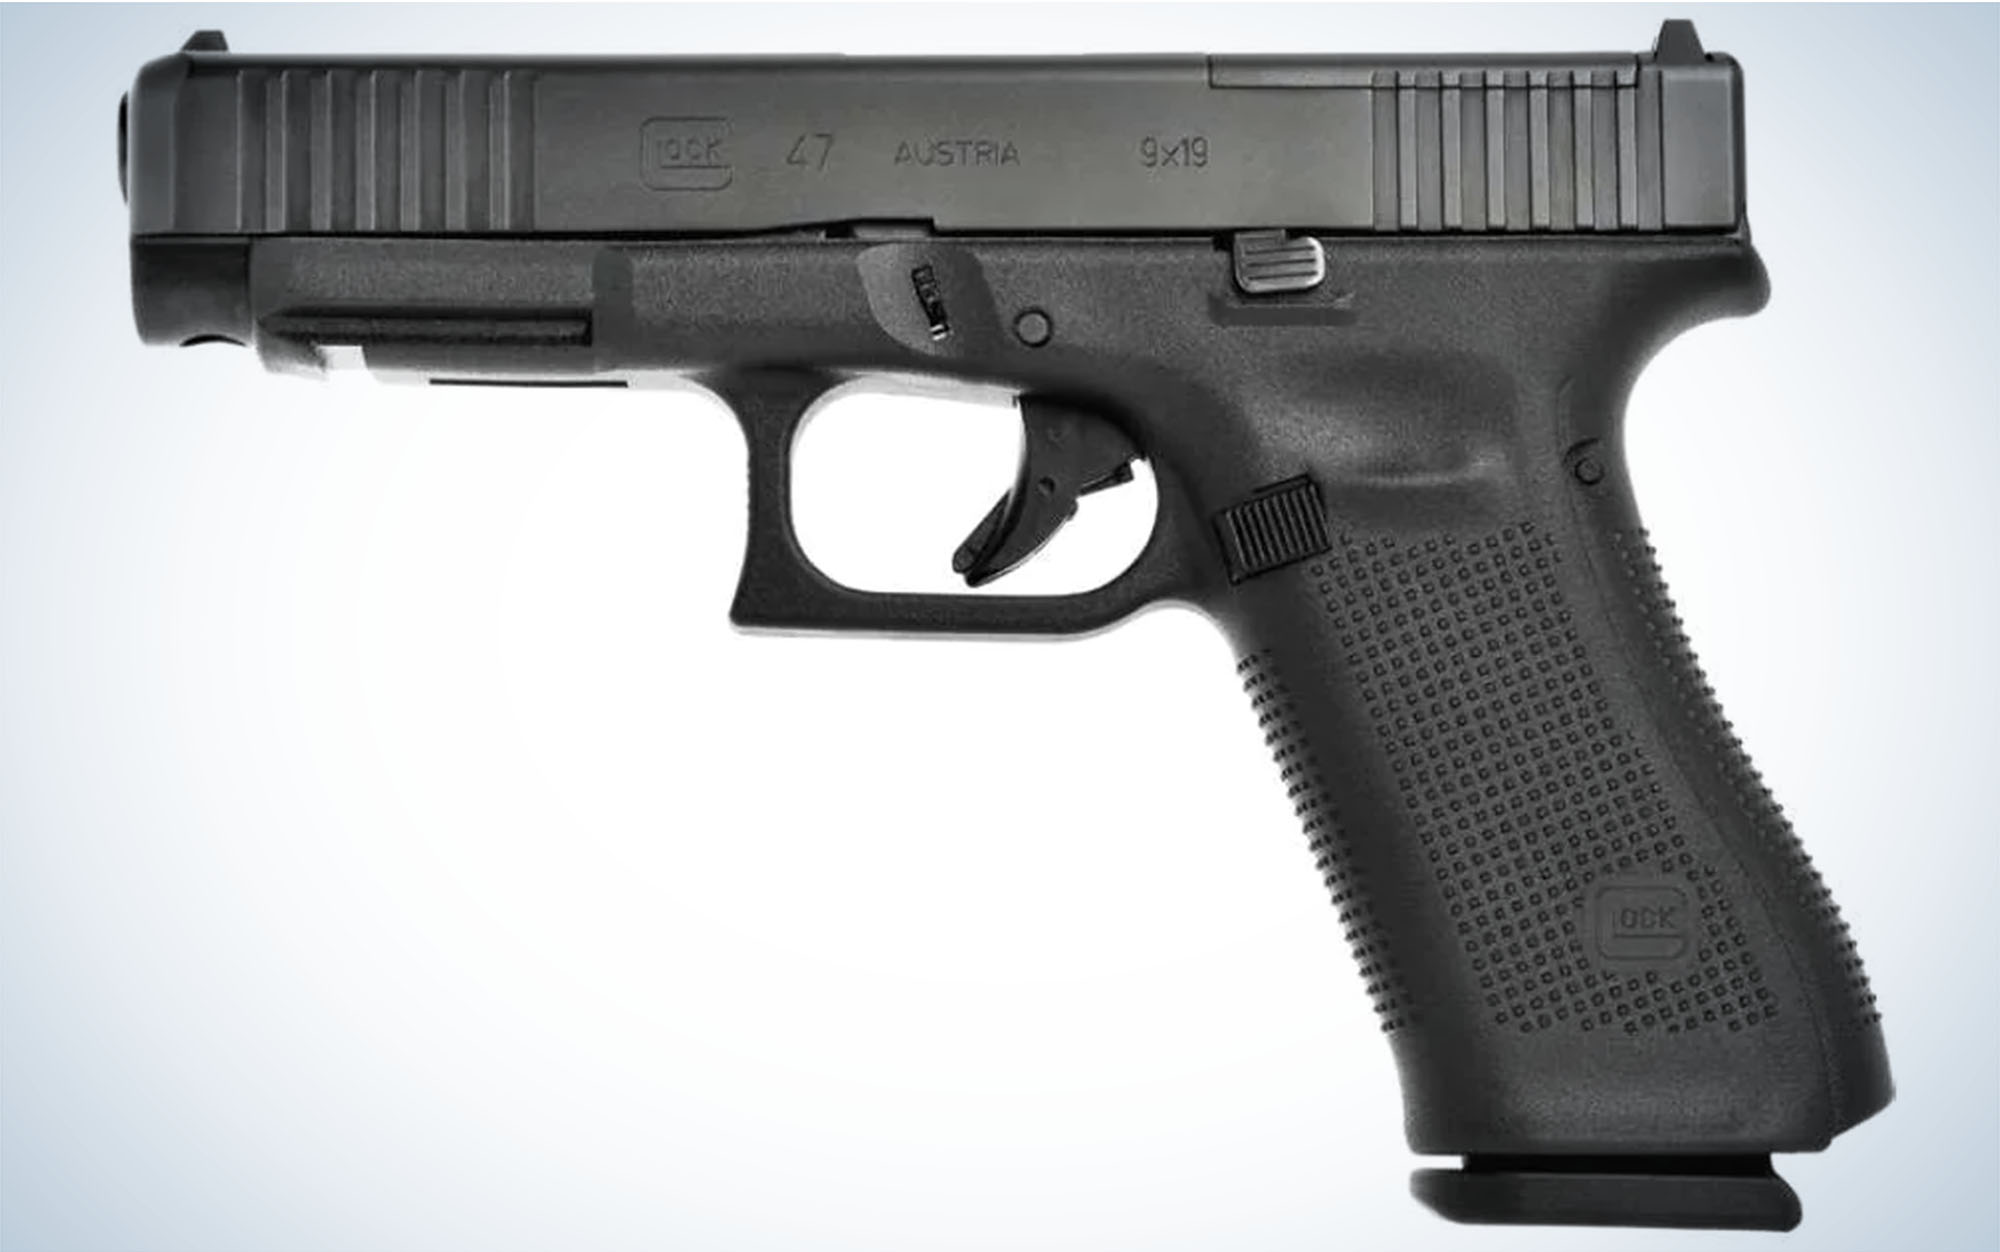 The Glock G47 MOS was newly released.